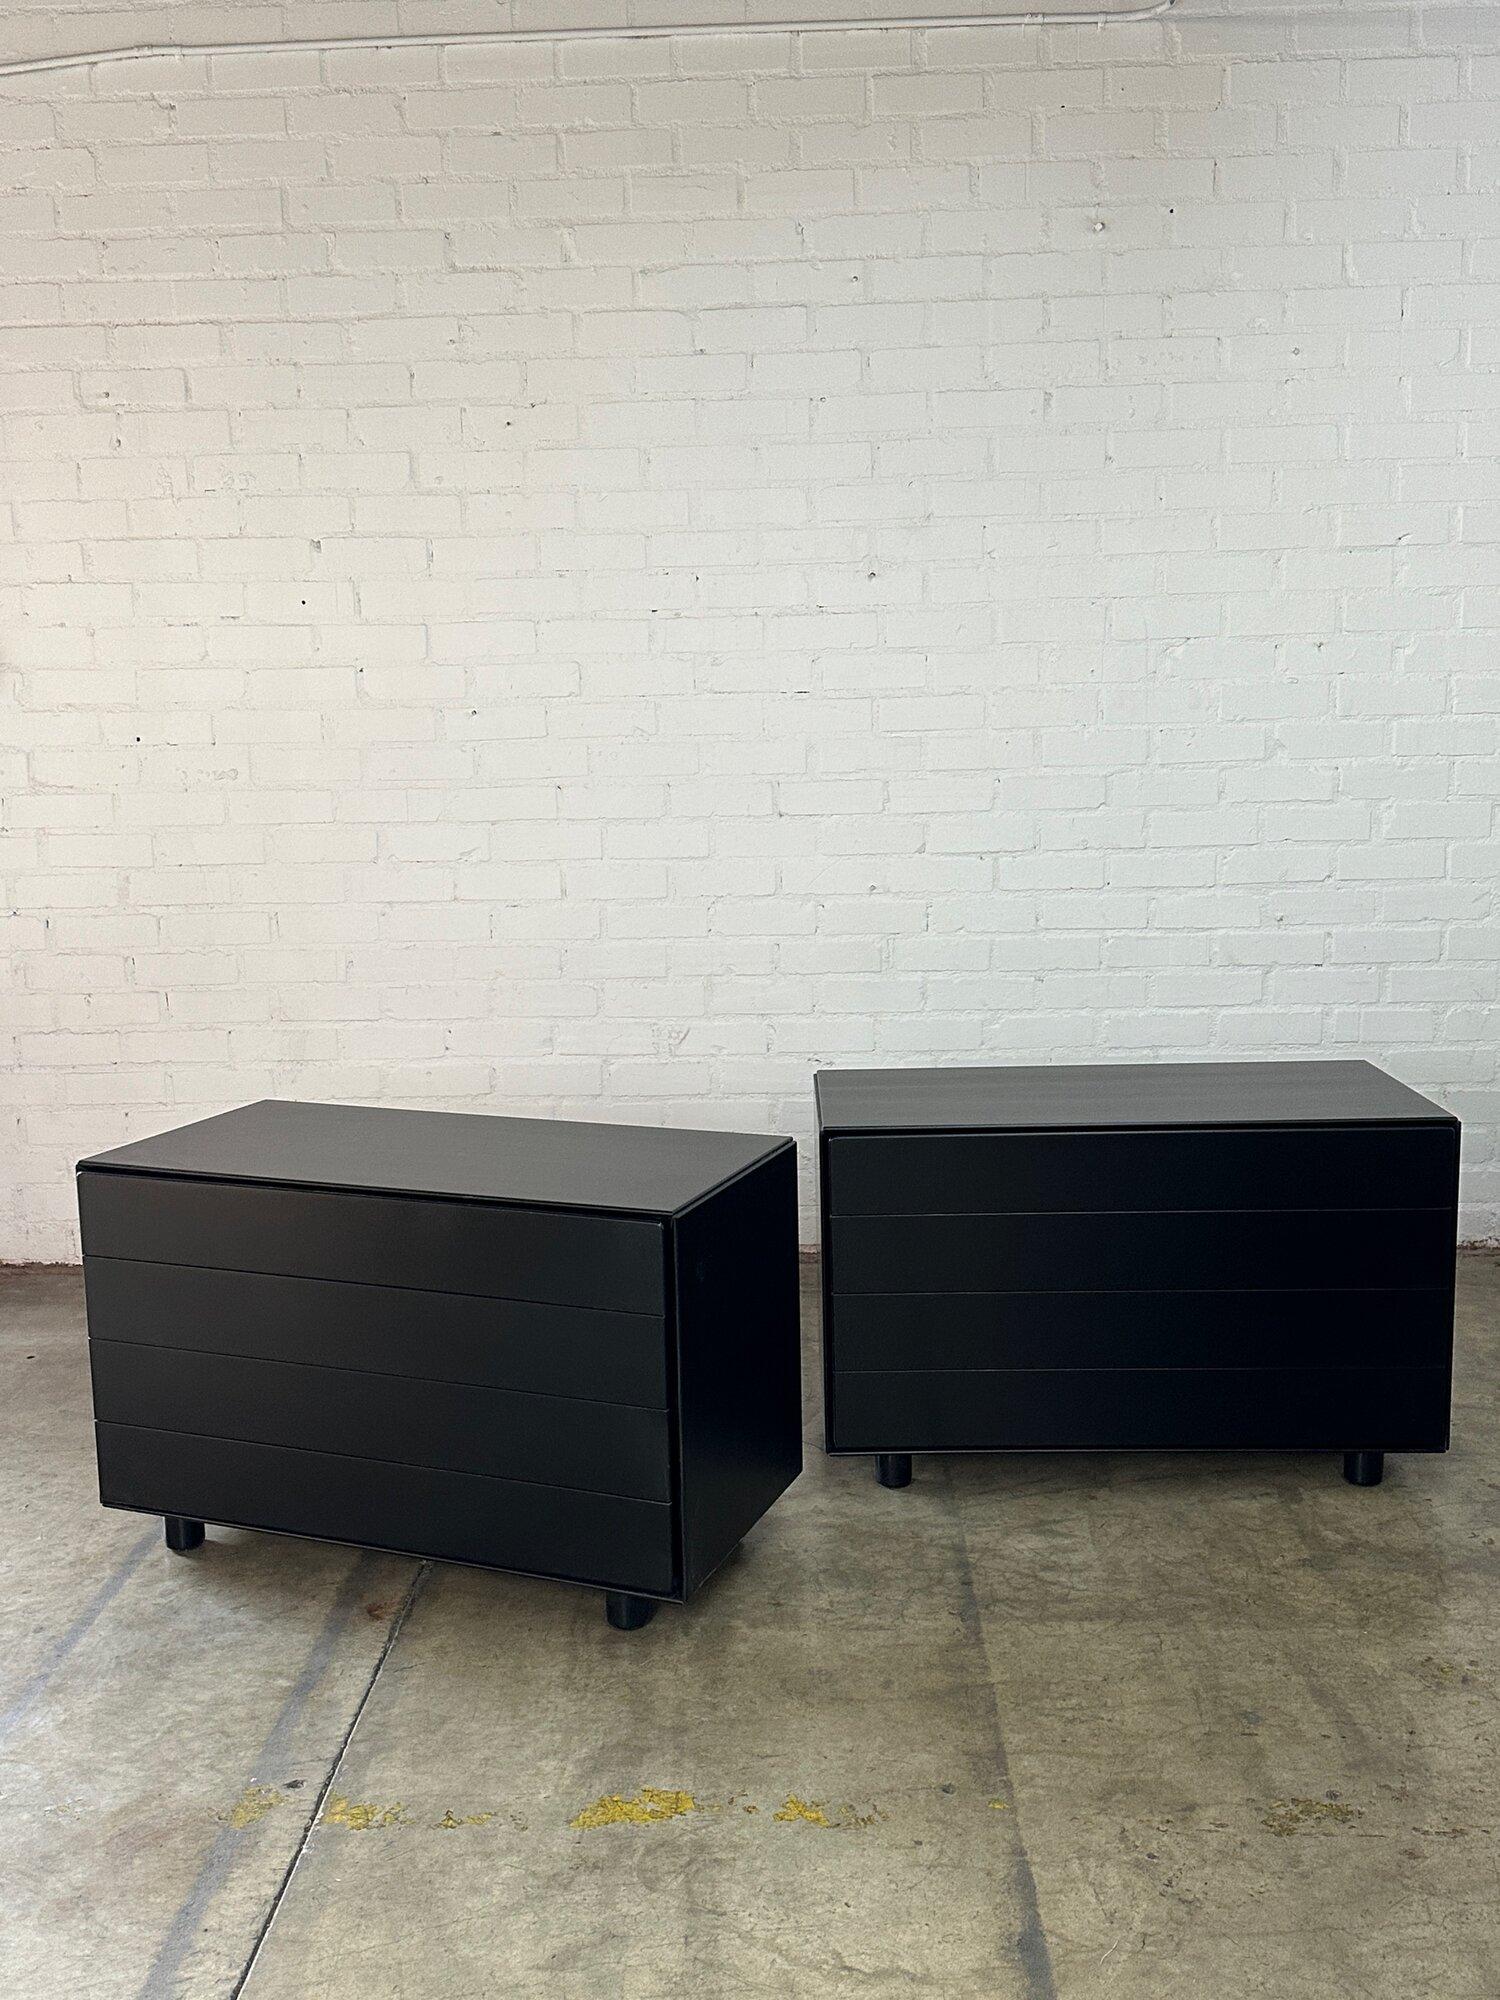 W43.5 D21 H27

1980’s Post Modern Black Lacquered Compact Dresser. Dresser features 4 drawers and sits on cylinder legs. Item has been lightly restored and is structurally sound.

Price is for each*

